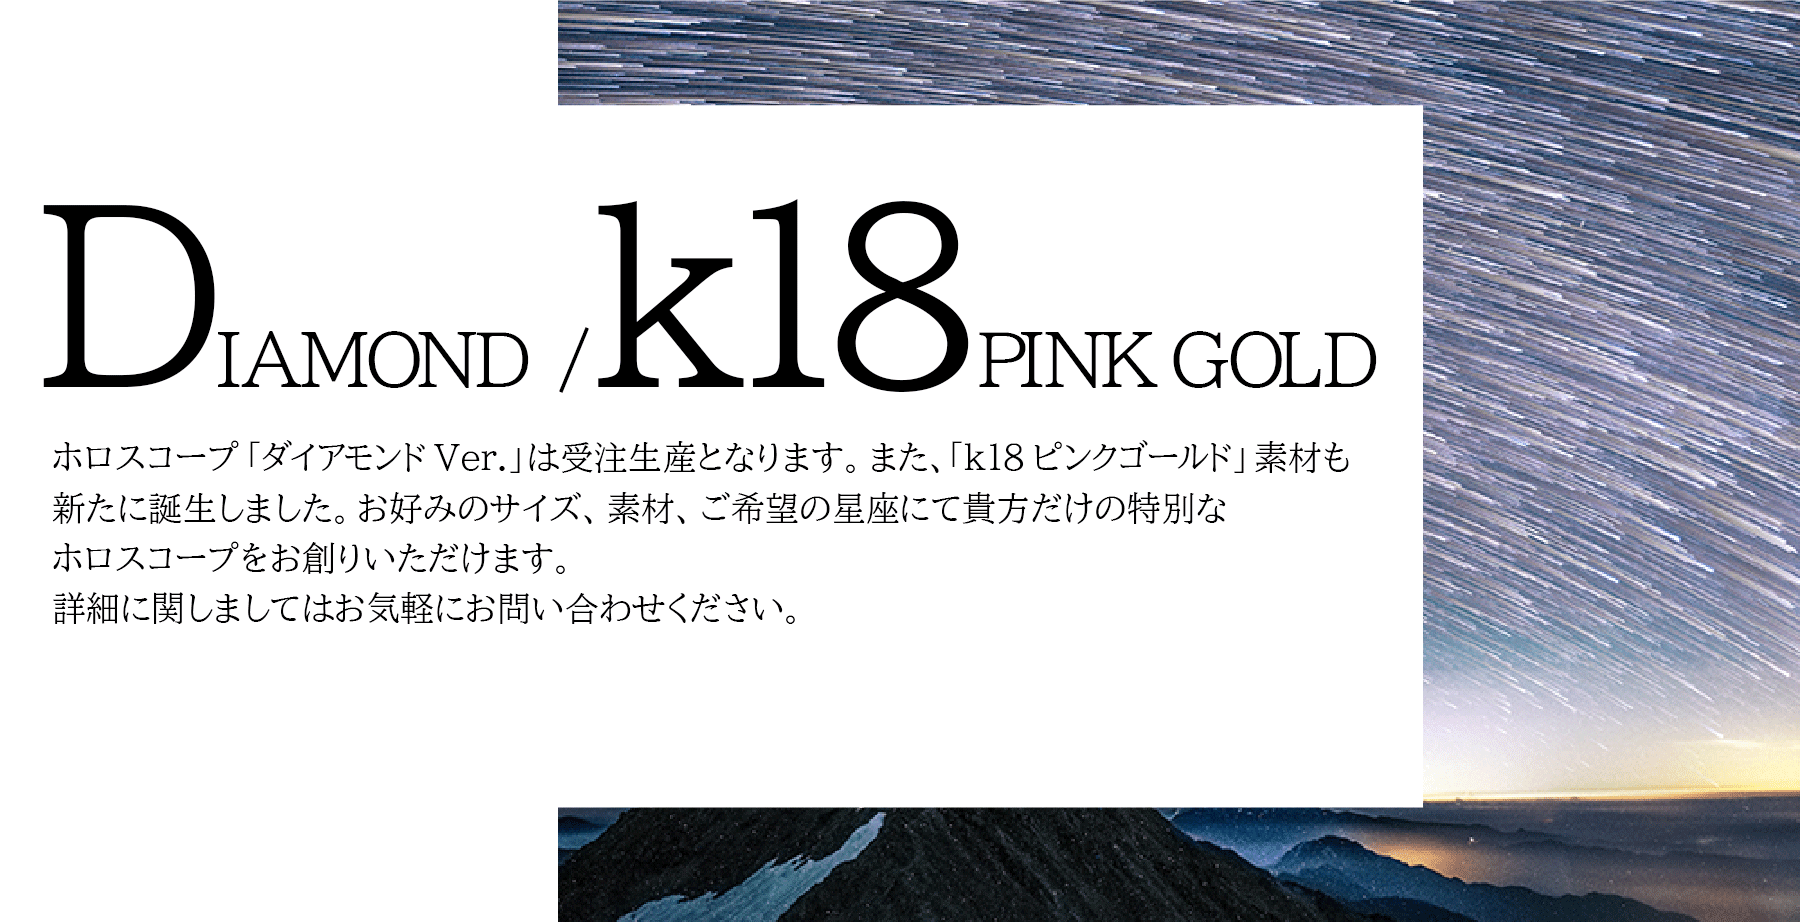 Horoscope "Diamond Ver." Is made to order.In addition, a new “k18 pink gold” material has been created.You can create your own special horoscope with your favorite size, material and desired constellation.Please do not hesitate to contact us for details.